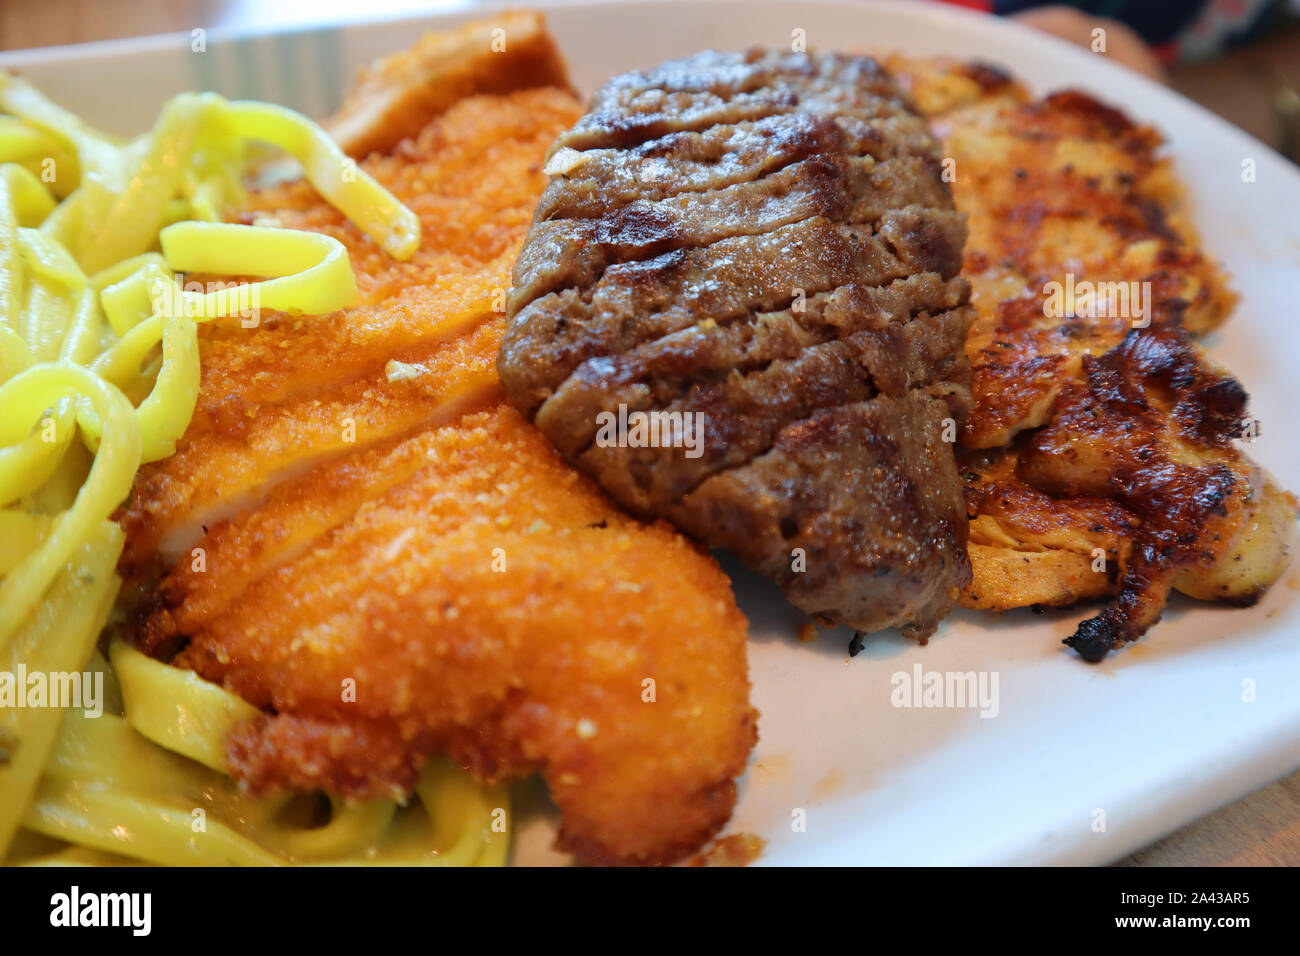 Delicious Cooked Fresh Food in Turkish Restaurant. Grilled Meat and Chicken. Stock Photo